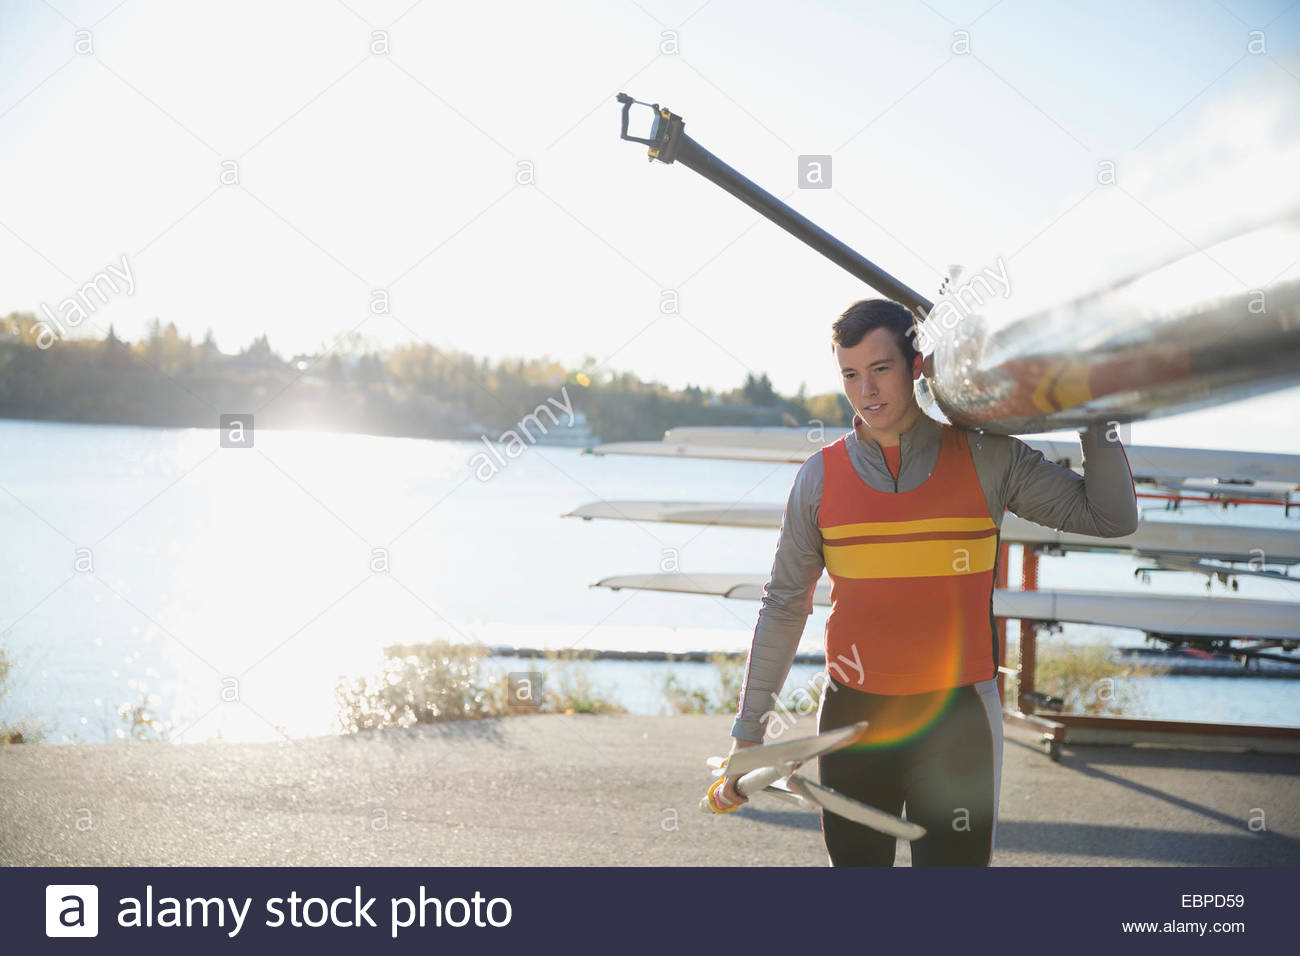 Rower carrying scull at waterfront Stock Photo